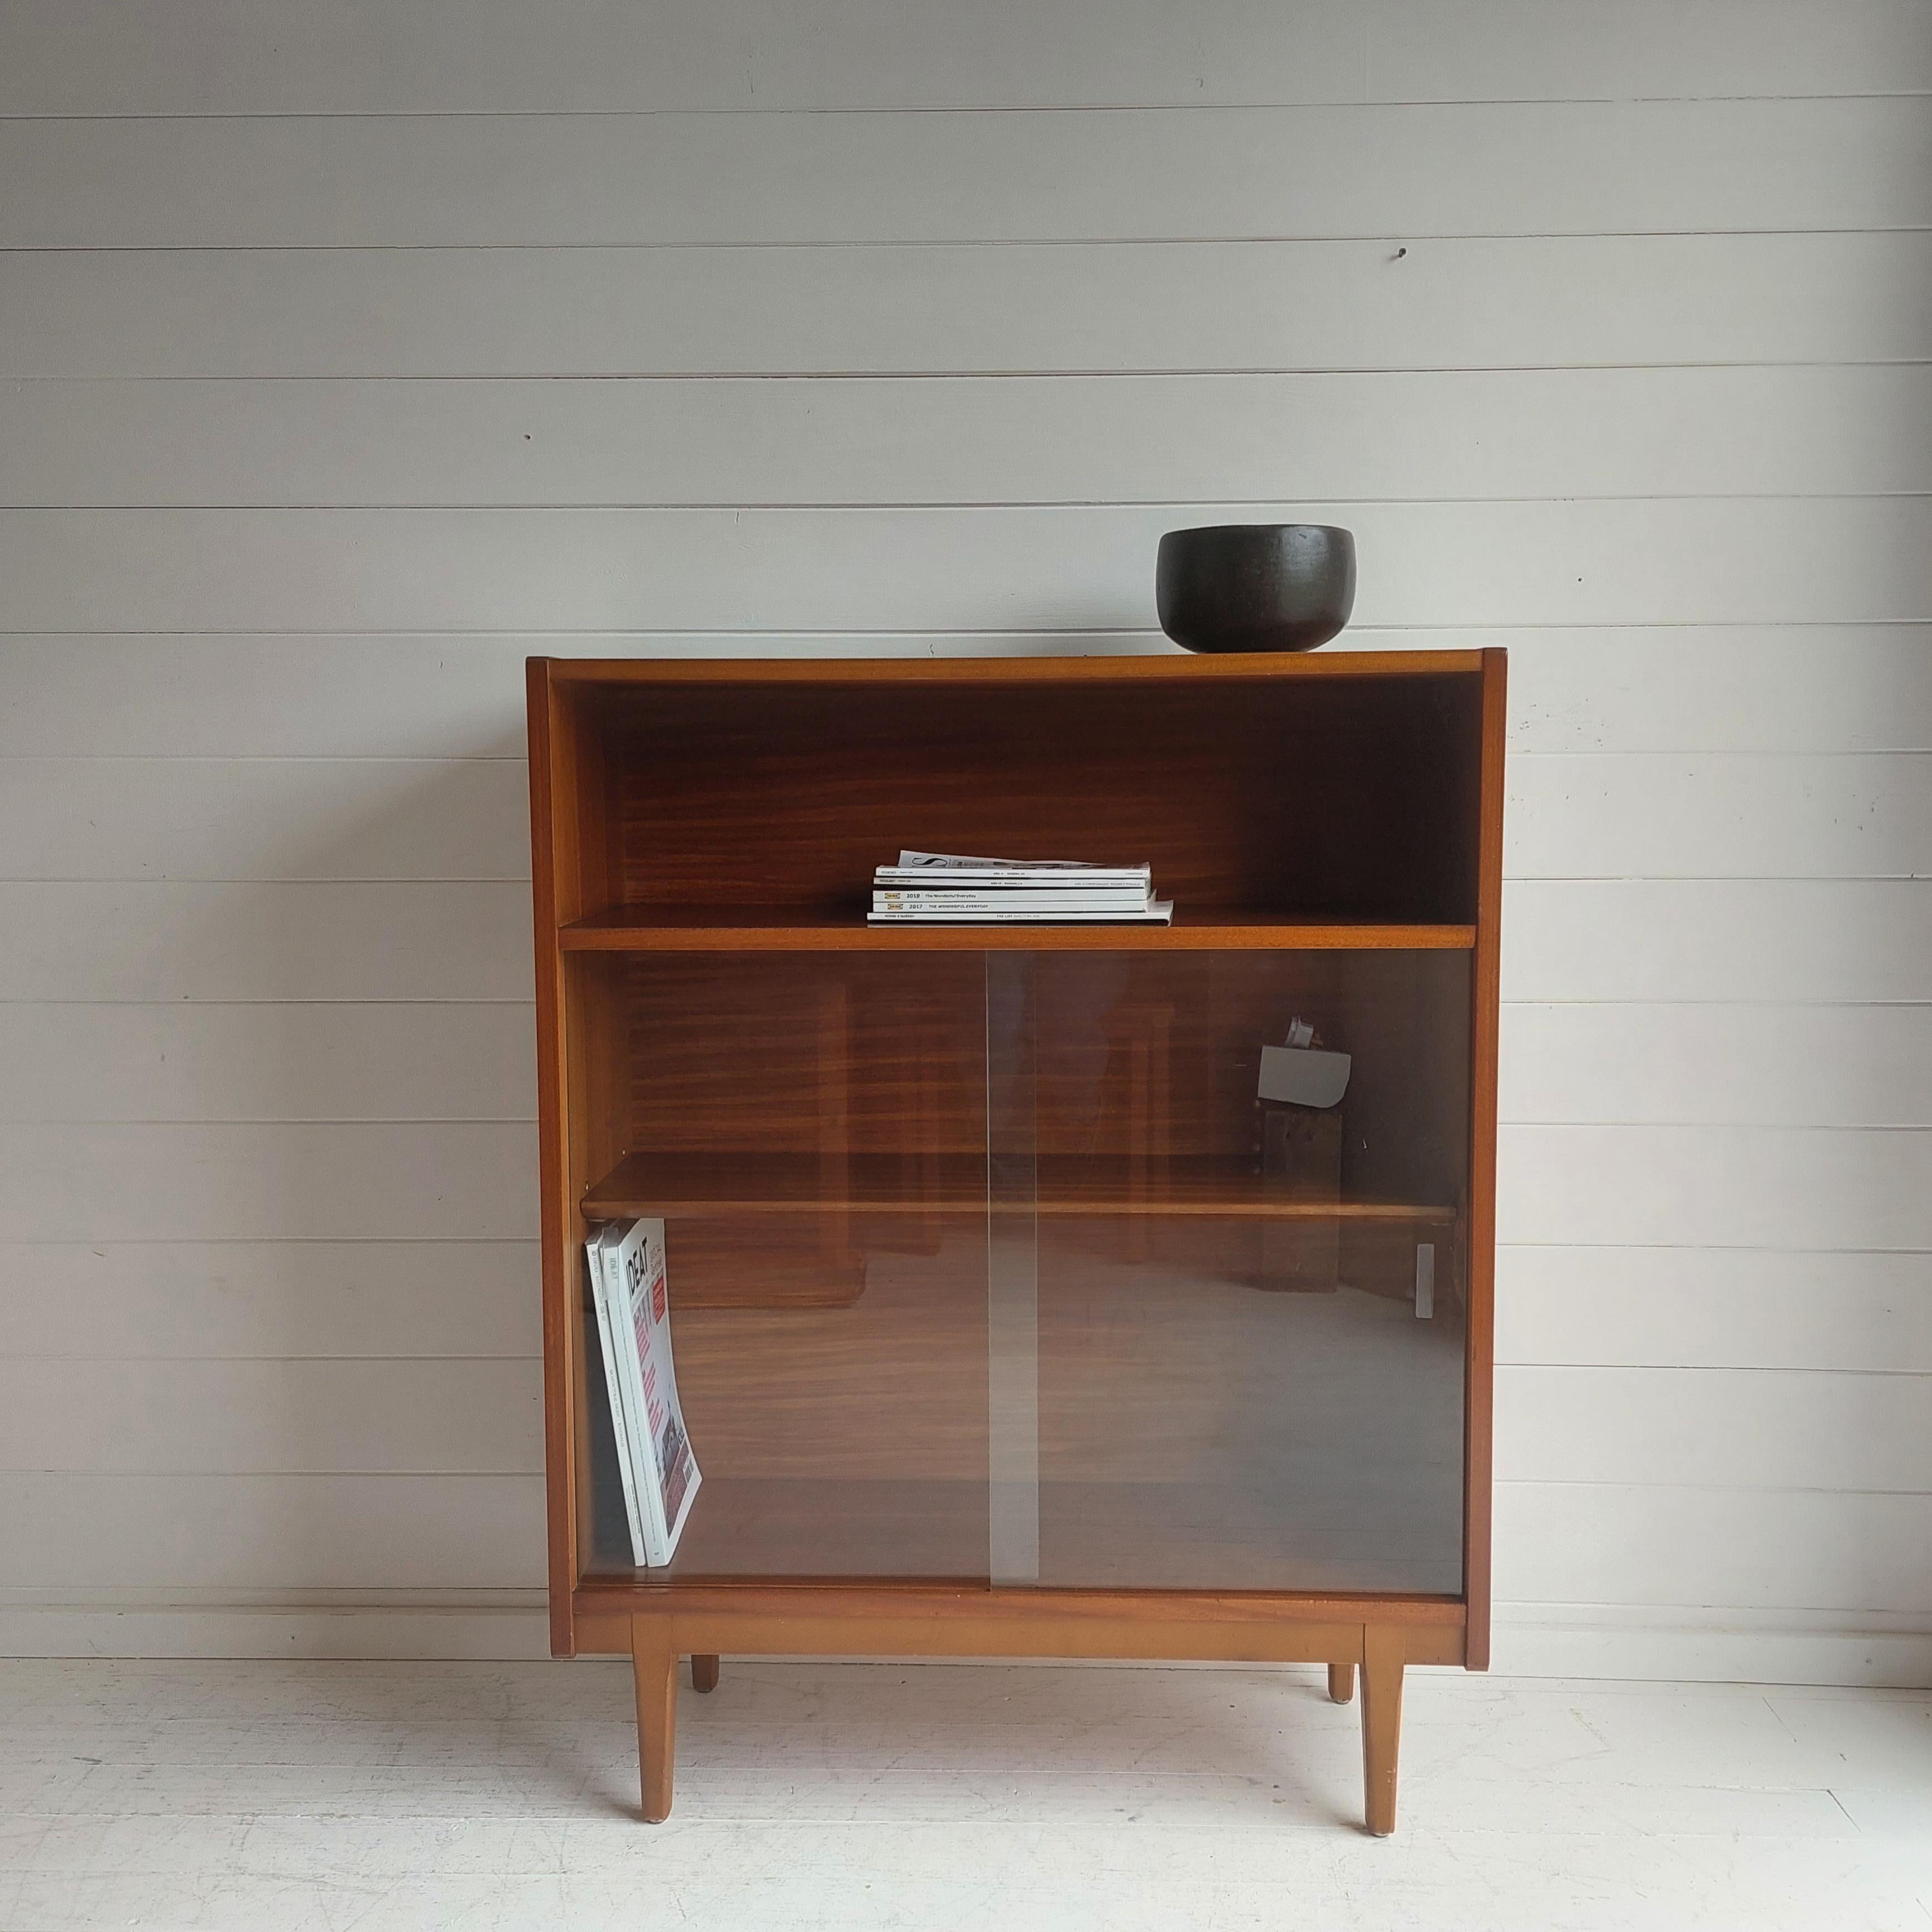 Midcentury retro style! 
1960s teak sideboard / bookcase designed by Nathan Furniture.

A lovely teak bookcase cabinet with sliding glass doors. 
A simple stylish piece that will provide a useful storage space in the modern home. 
A stunning